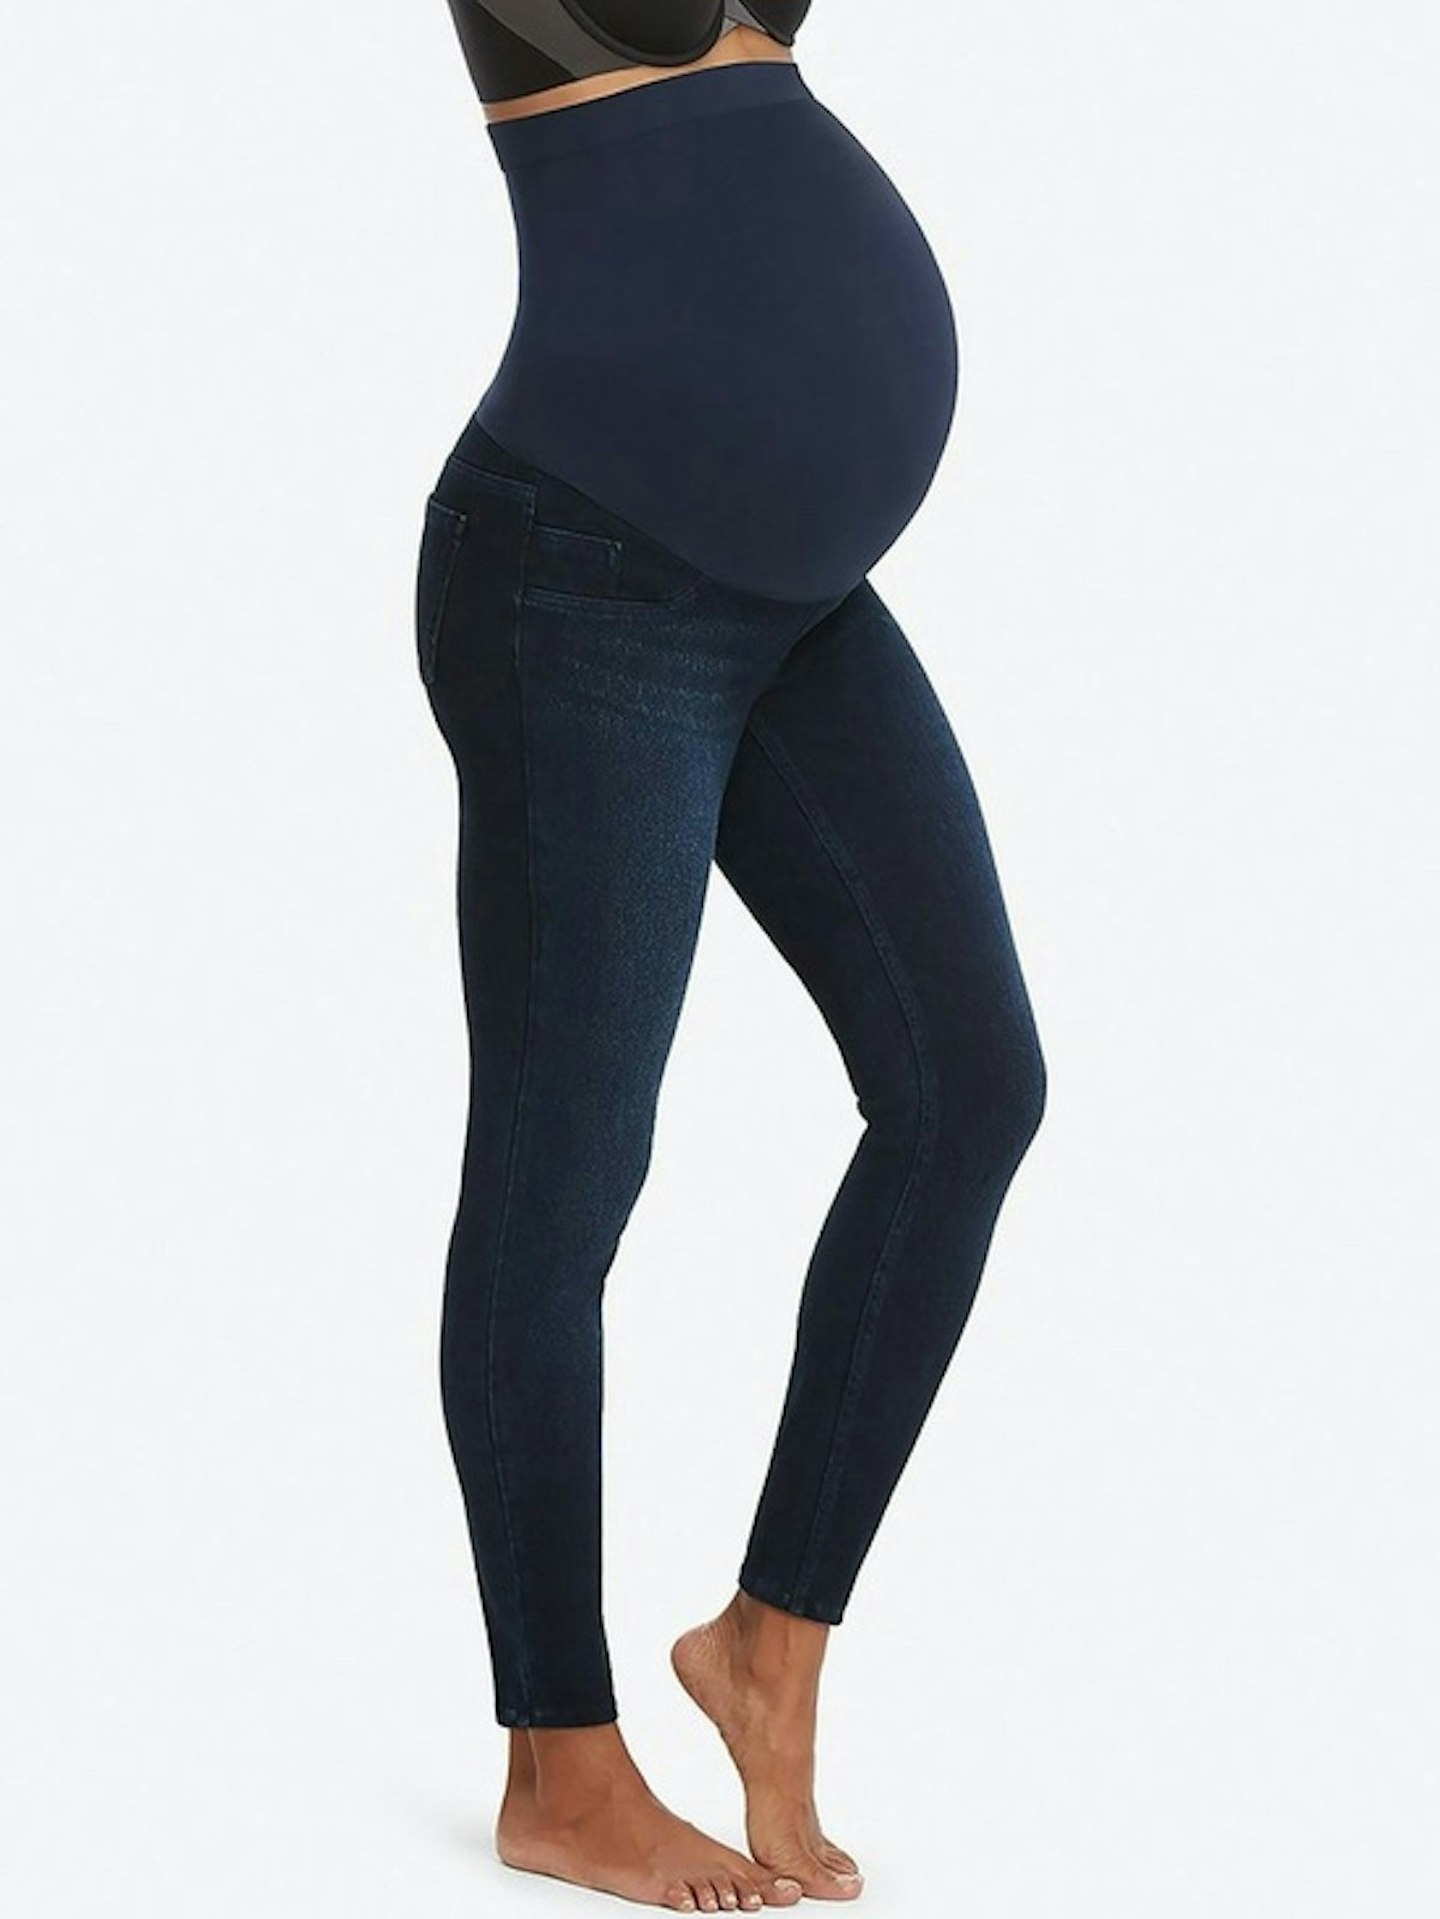 The Best Maternity Jeans to Buy in 2023